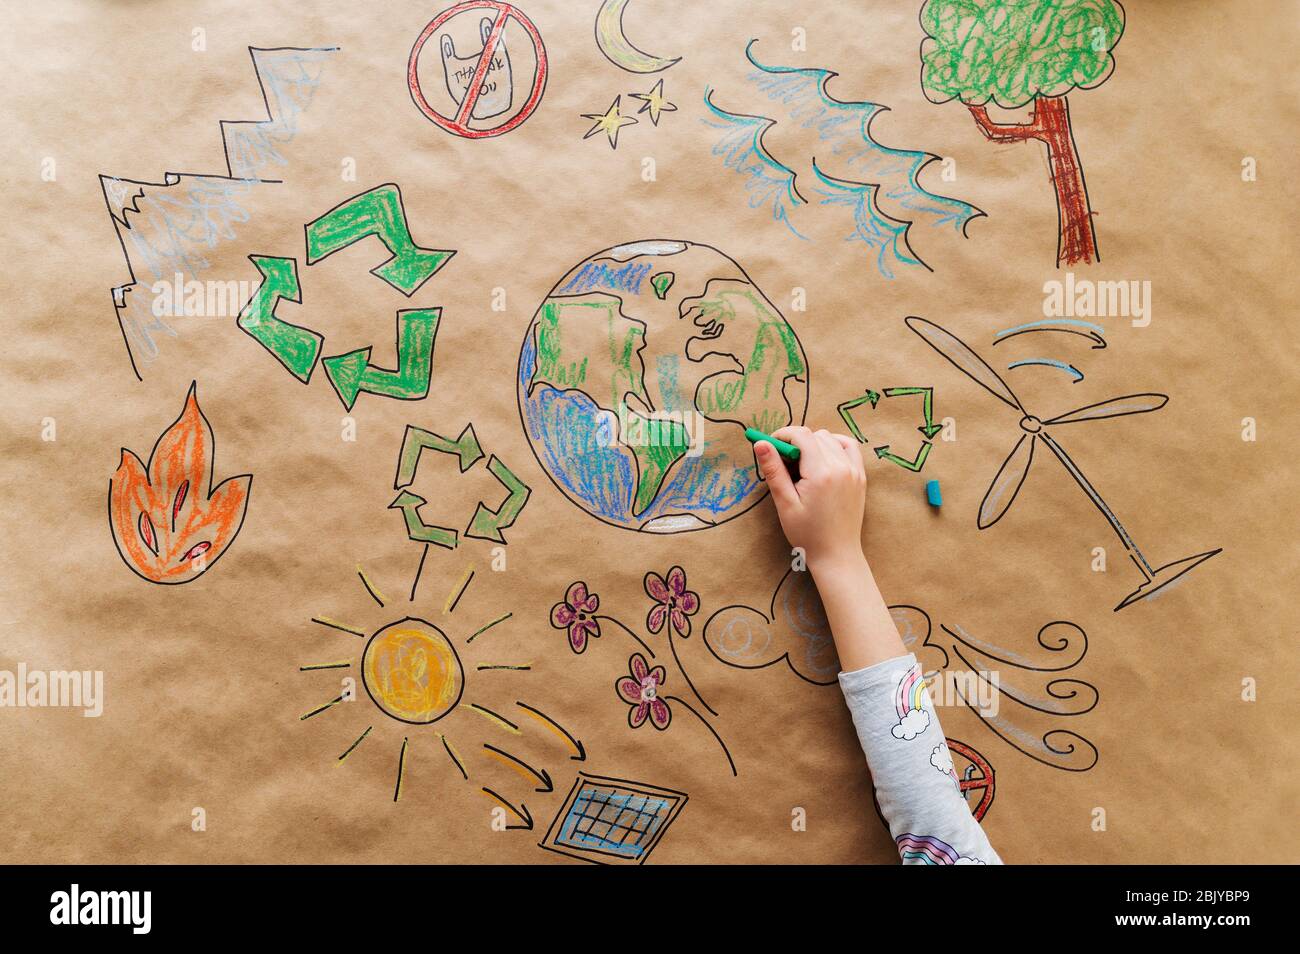 Girl drawing eco friendly posterÂ Stock Photo